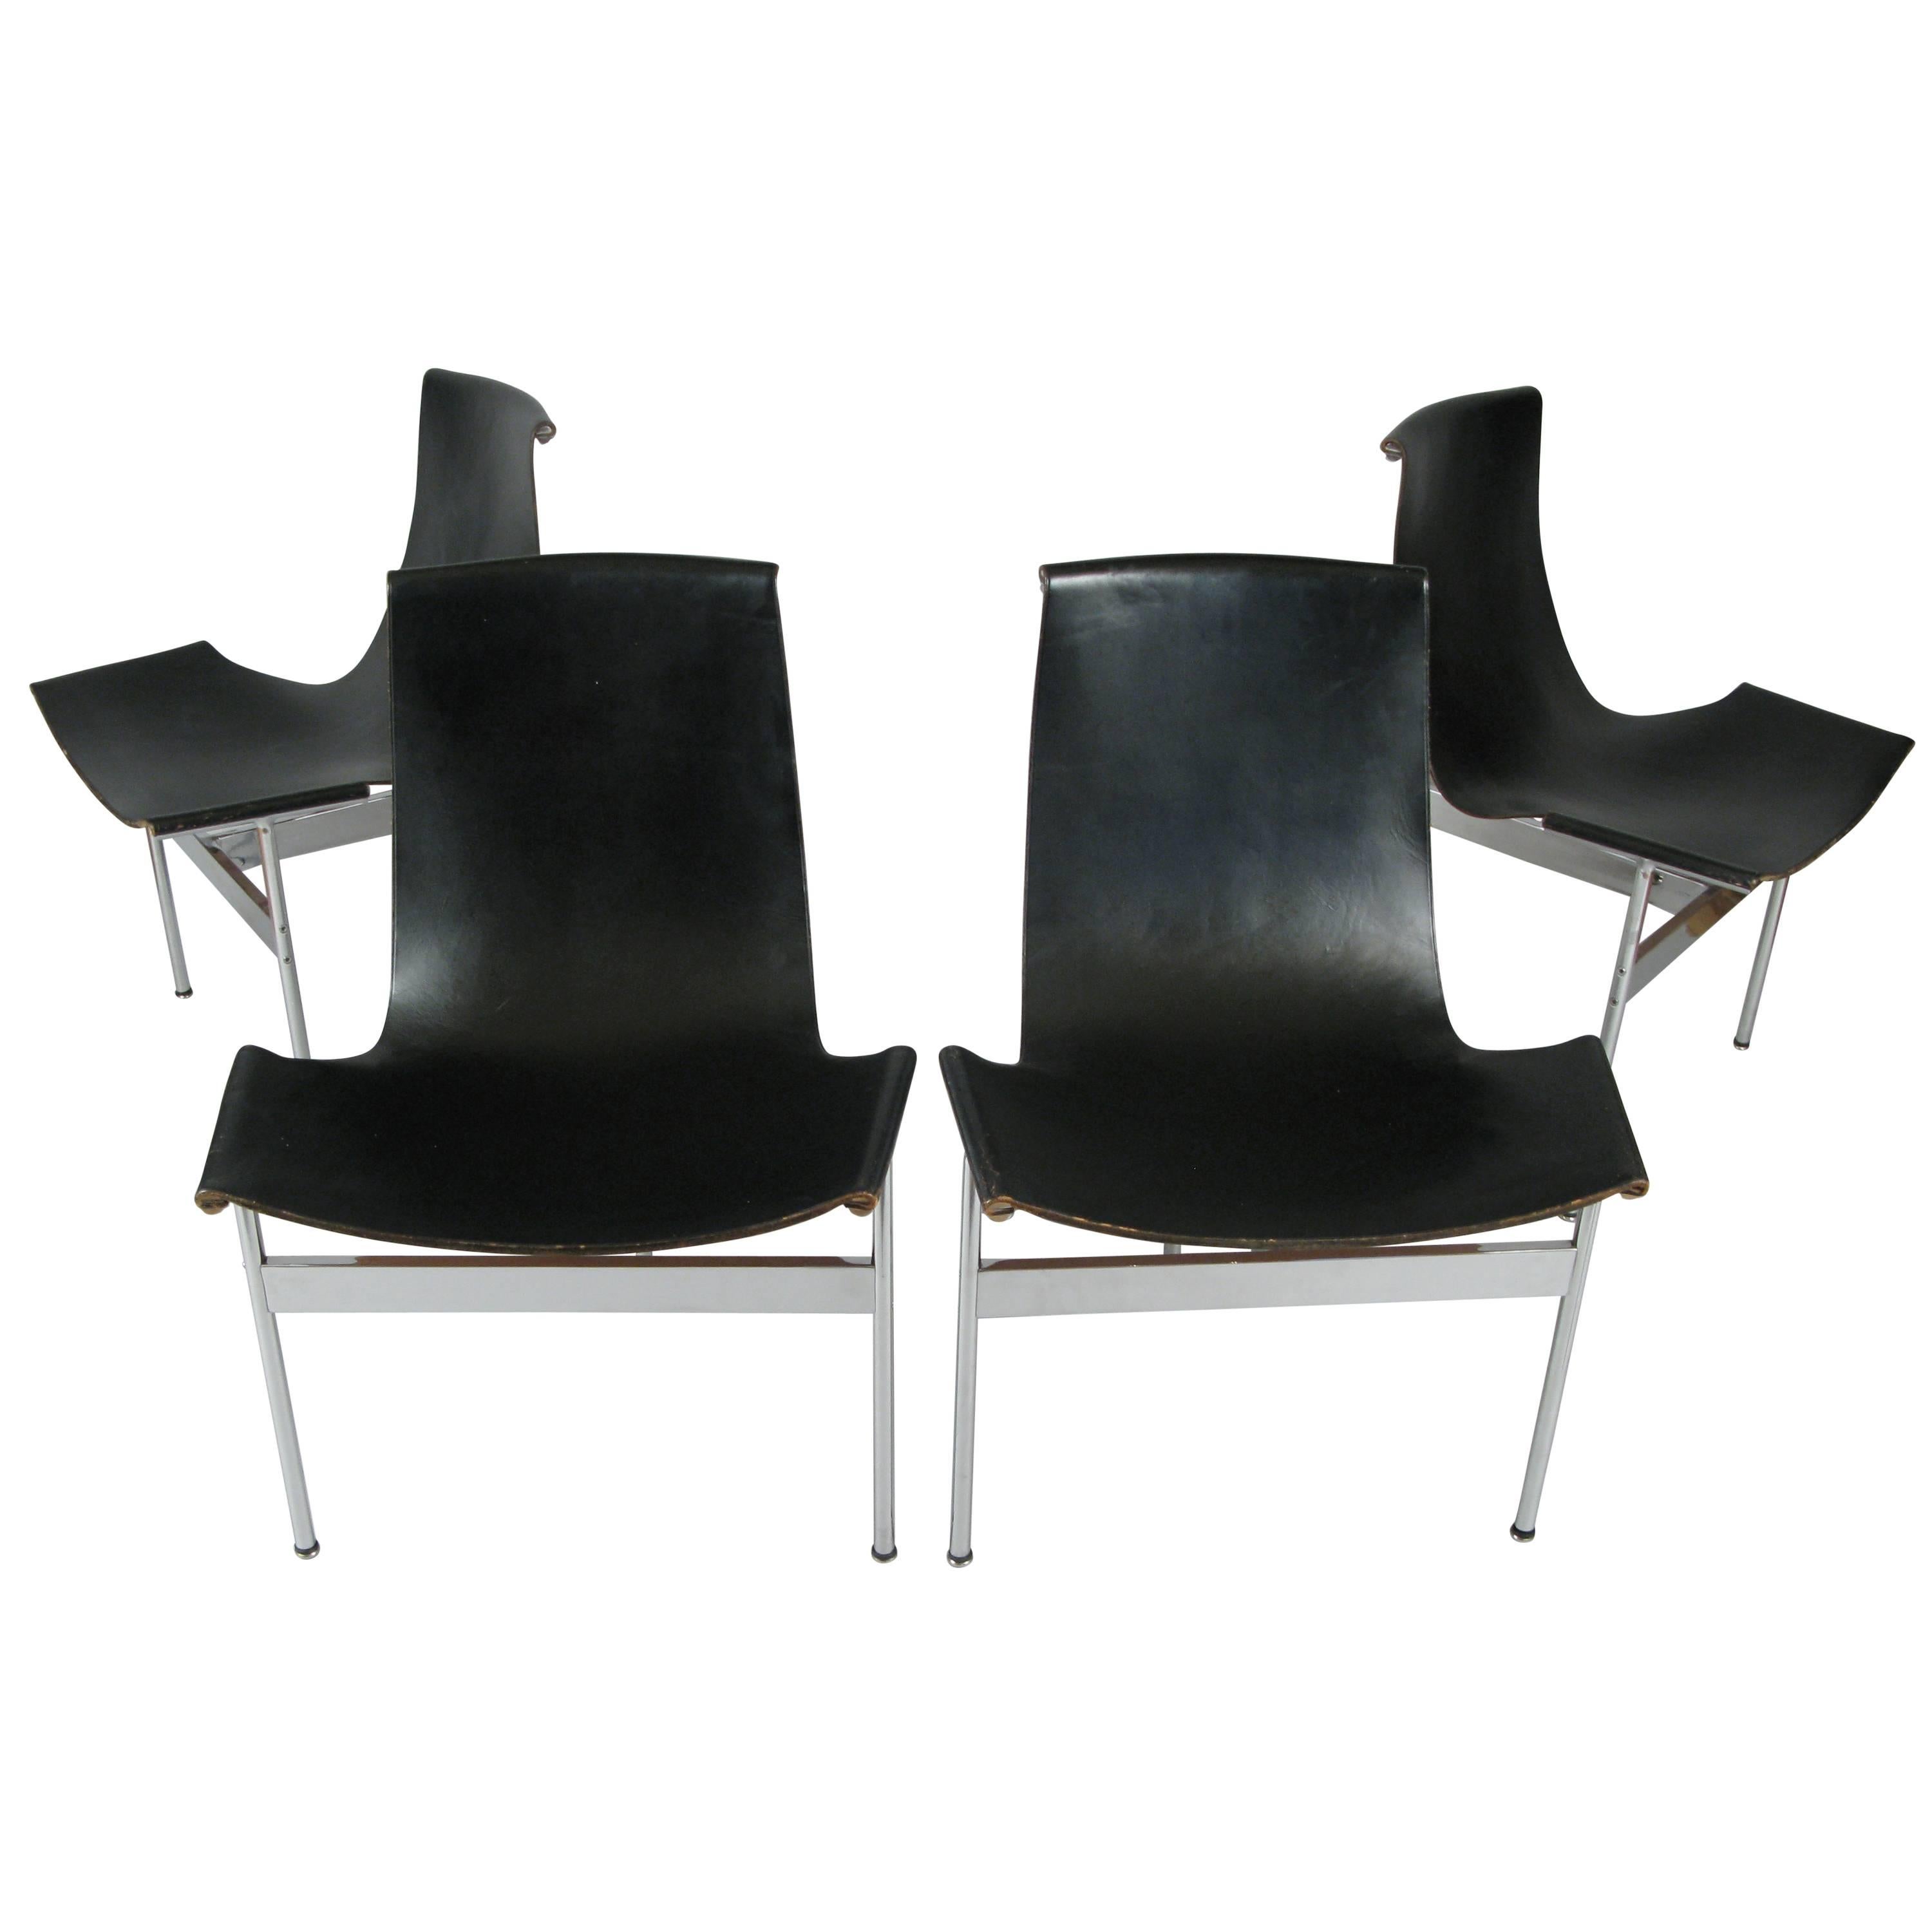 Set of Four Leather and Chrome Chairs by Katavolos, Kelly, Littell for Laverne